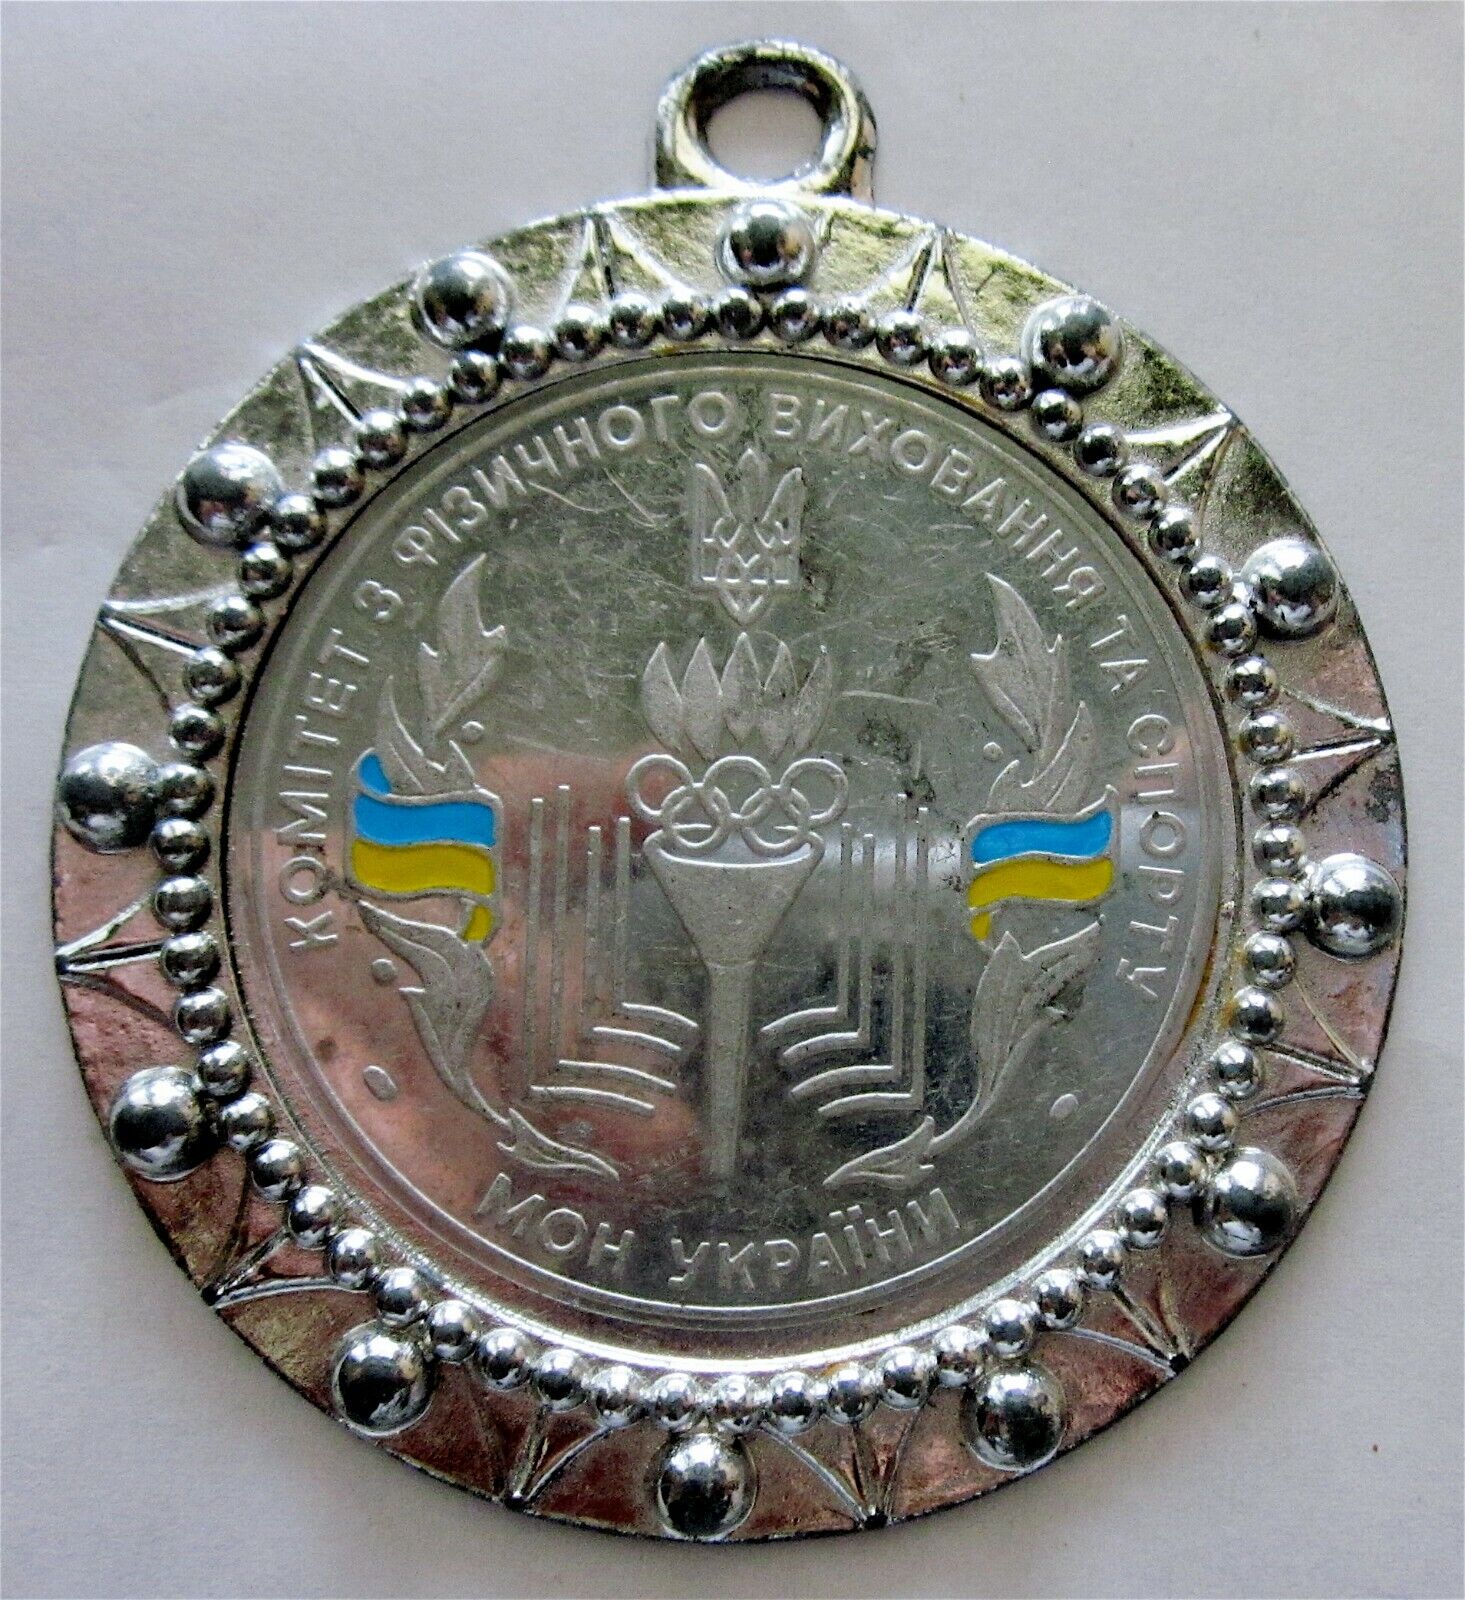 MINISTRY OF EDUCATION & SCIENCE OF UKRAINE - SPORT COMMITTEE MEDAL